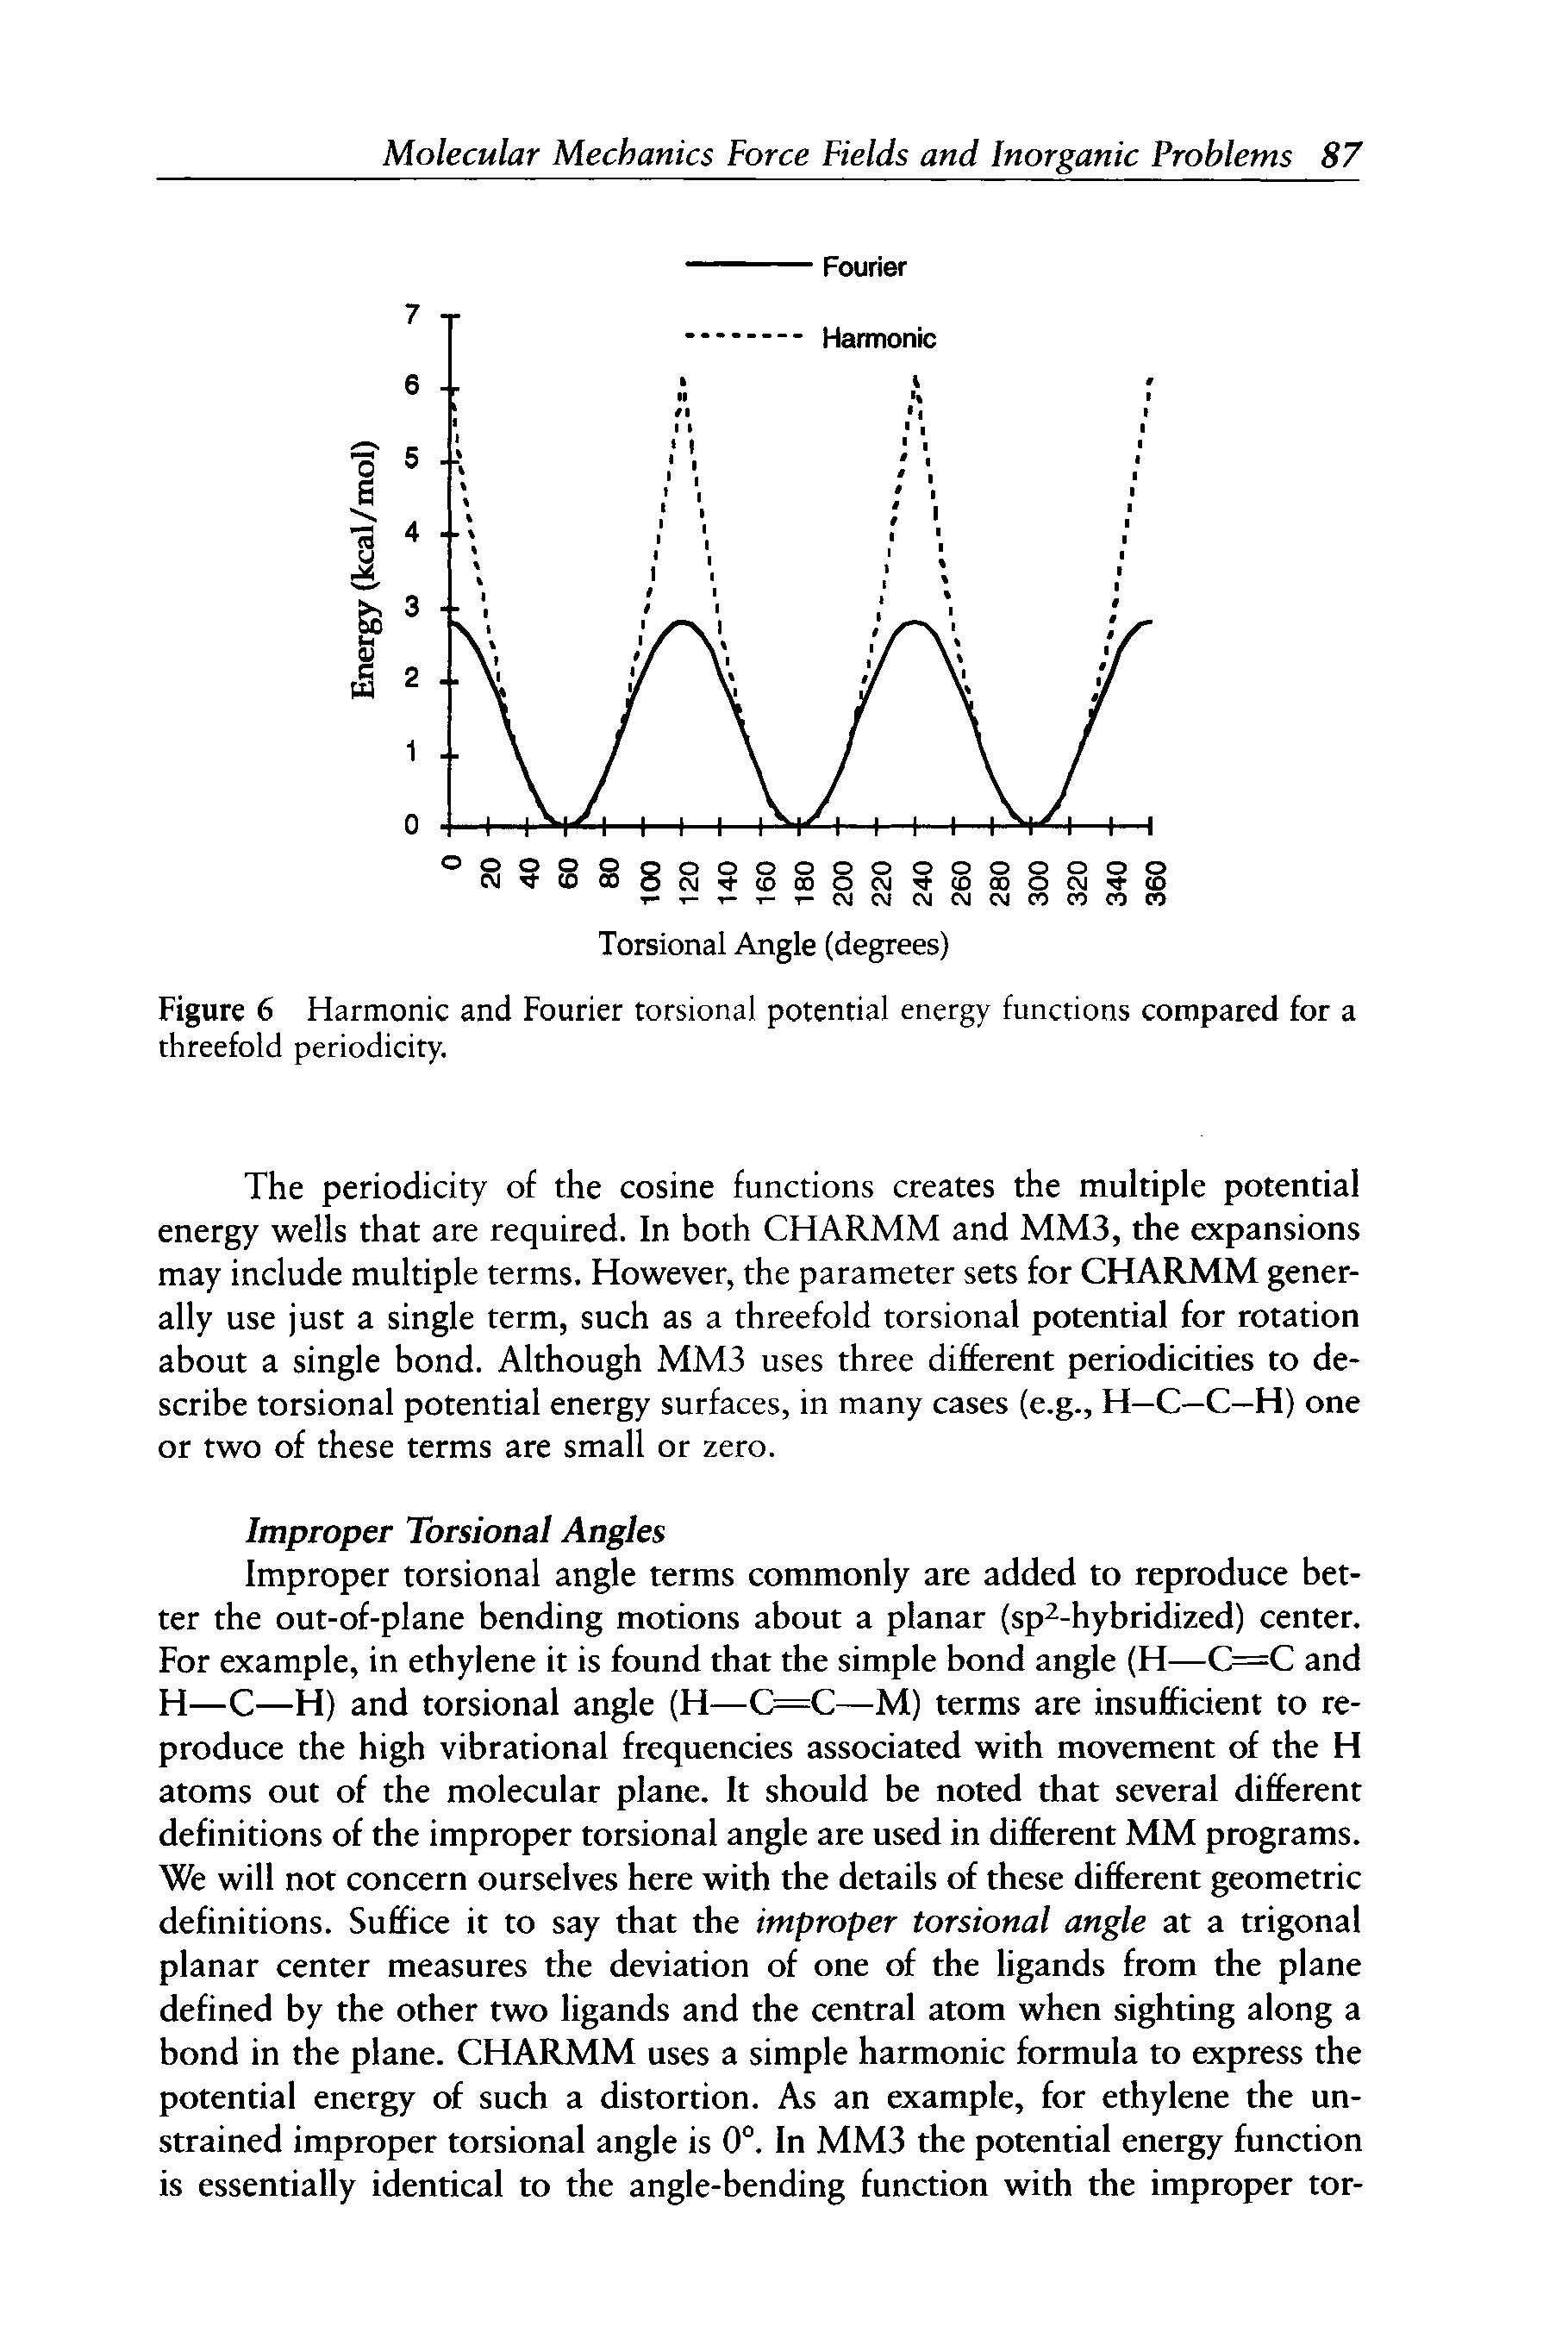 Figure 6 Harmonic and Fourier torsional potential energy functions compared for a threefold periodicity.